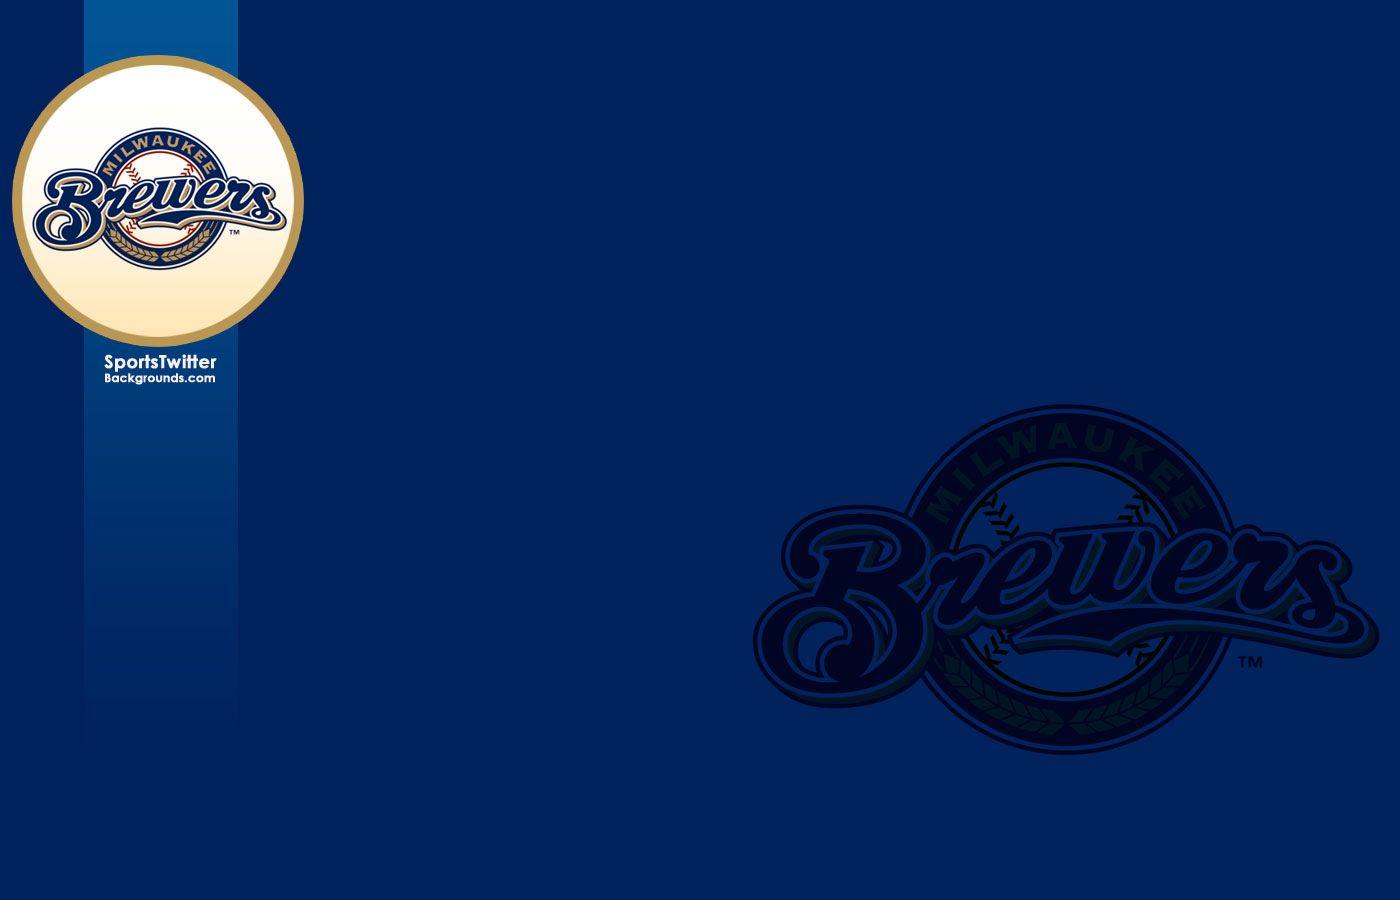 Milwaukee Brewers Wallpaper for iPhone. World's Greatest Art Site